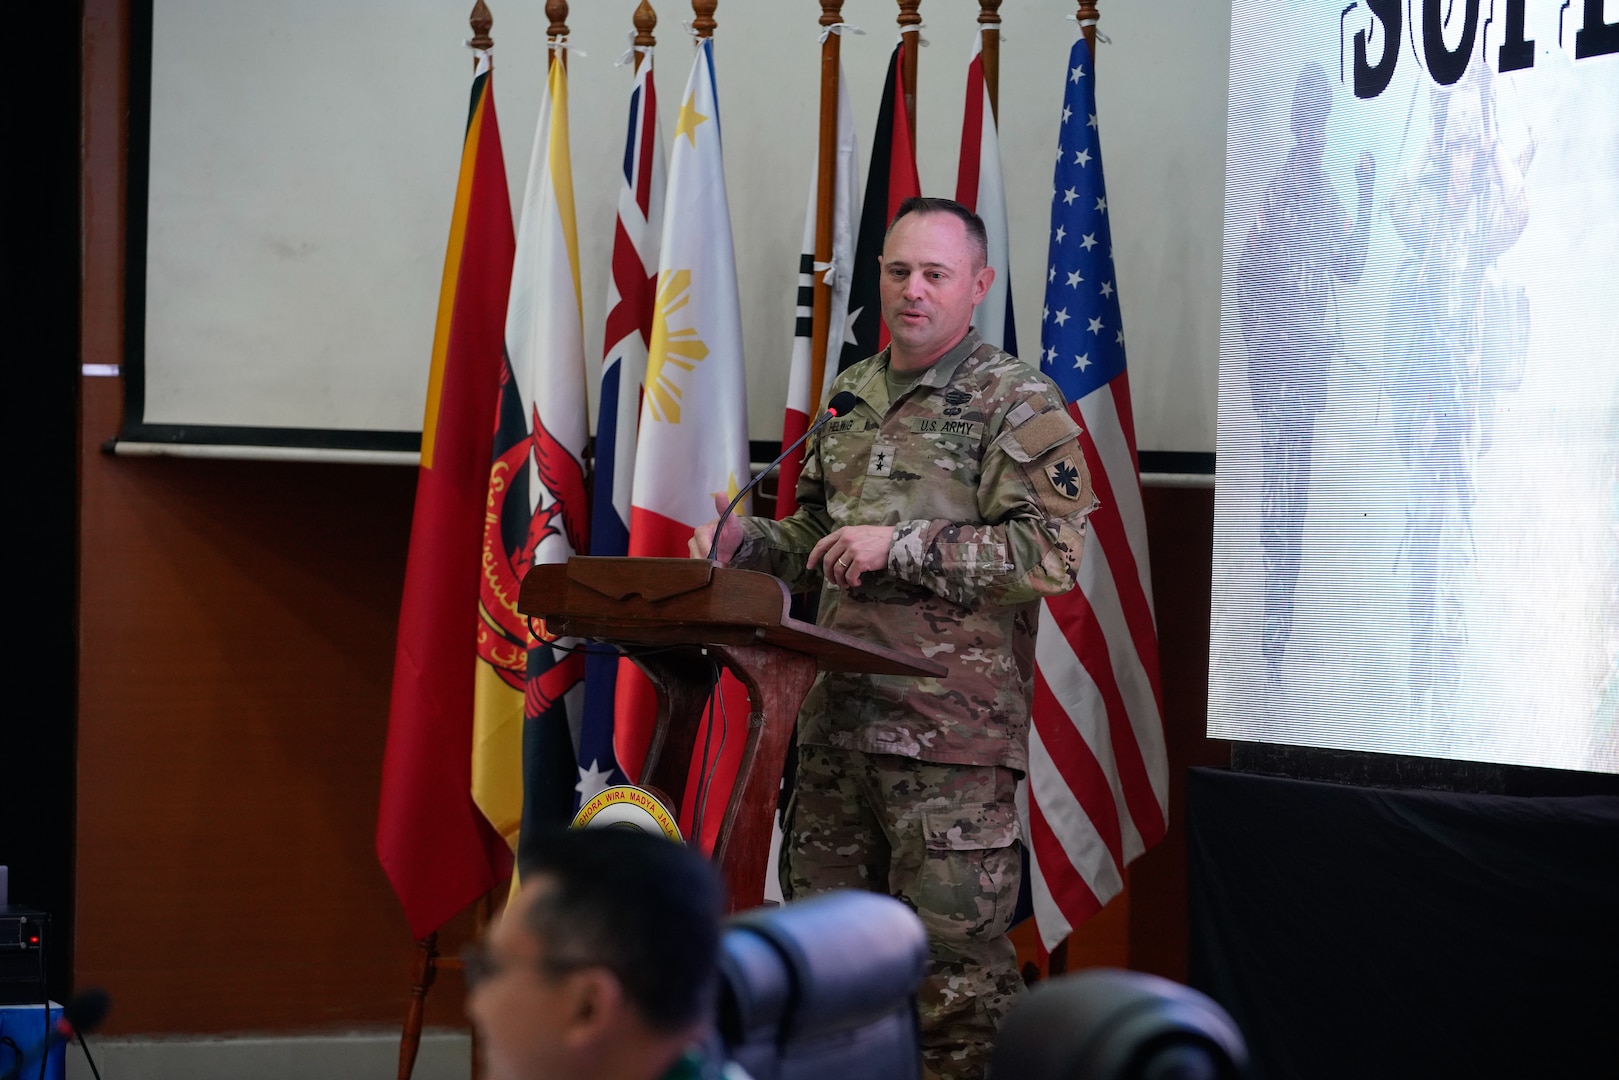 Maj. Gen. Jered P. Helwig, Commanding General, 8th Theater Sustainment Command, offers his opening remarks during the opening ceremony of staff exercise portion of Super Garuda Shield 2023 (SGS23) August 31, 2023, Surabaya Indonesia. #SuperGarudaShield 2023 is an annual exercise that has significantly grown in scope and size since 2009. #SGS2023 is the second consecutive time this exercise has grown into a combined and #joint event, highlighting the 6 participating and 12 observing nations’ commitment to #partnership and a #freeandopenindopacific. (US Air National Guard Photo by Air Force Master Sgt. Andrew Lee Jackson)